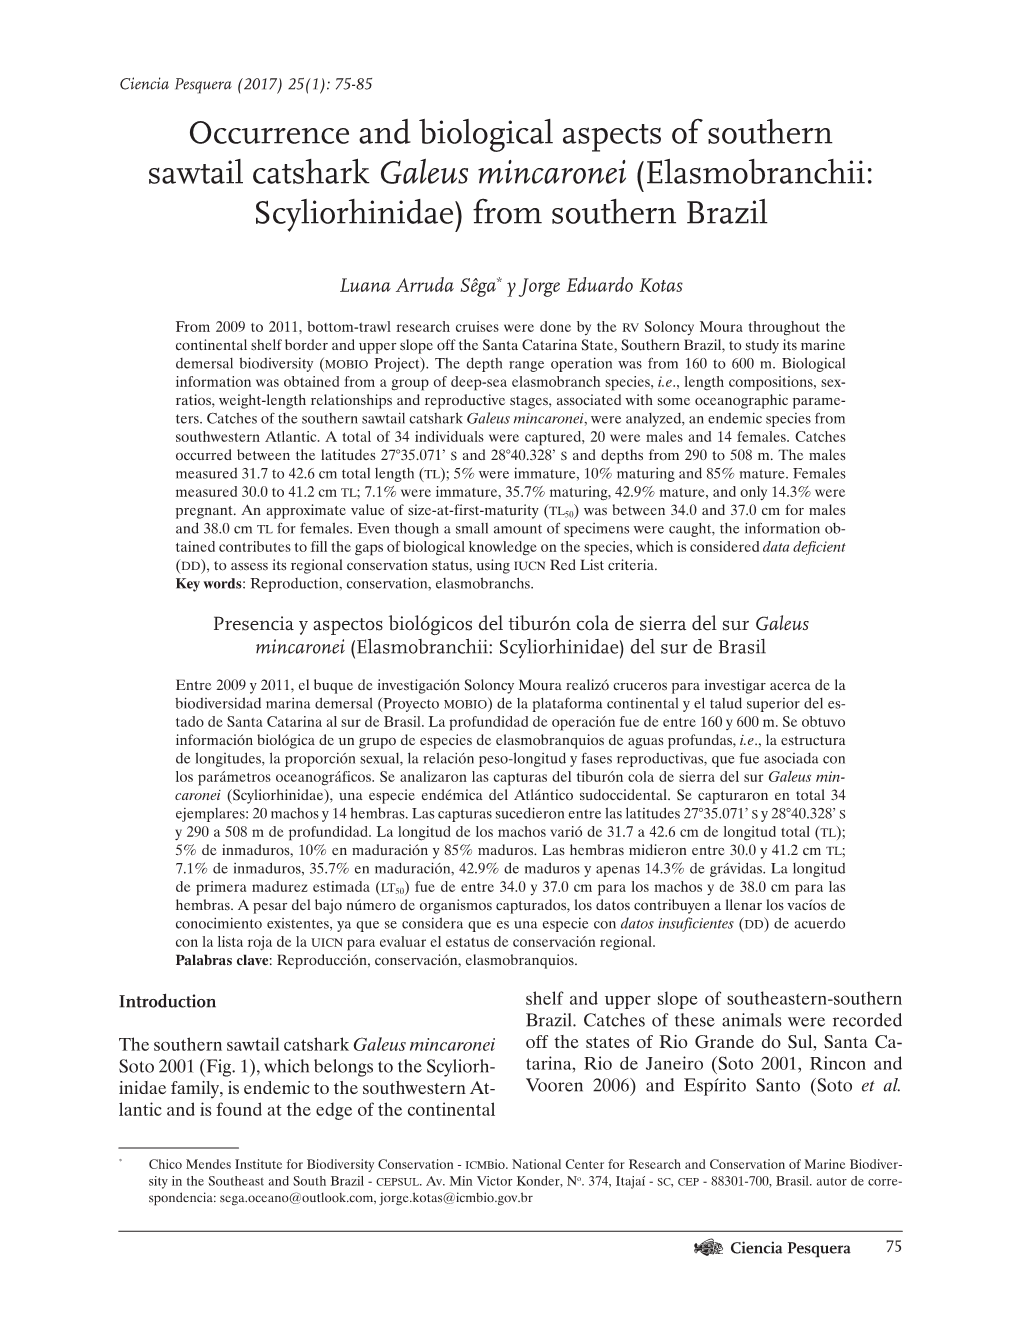 Occurrence and Biological Aspects of Southern Sawtail Catshark Galeus Mincaronei (Elasmobranchii: Scyliorhinidae) from Southern Brazil